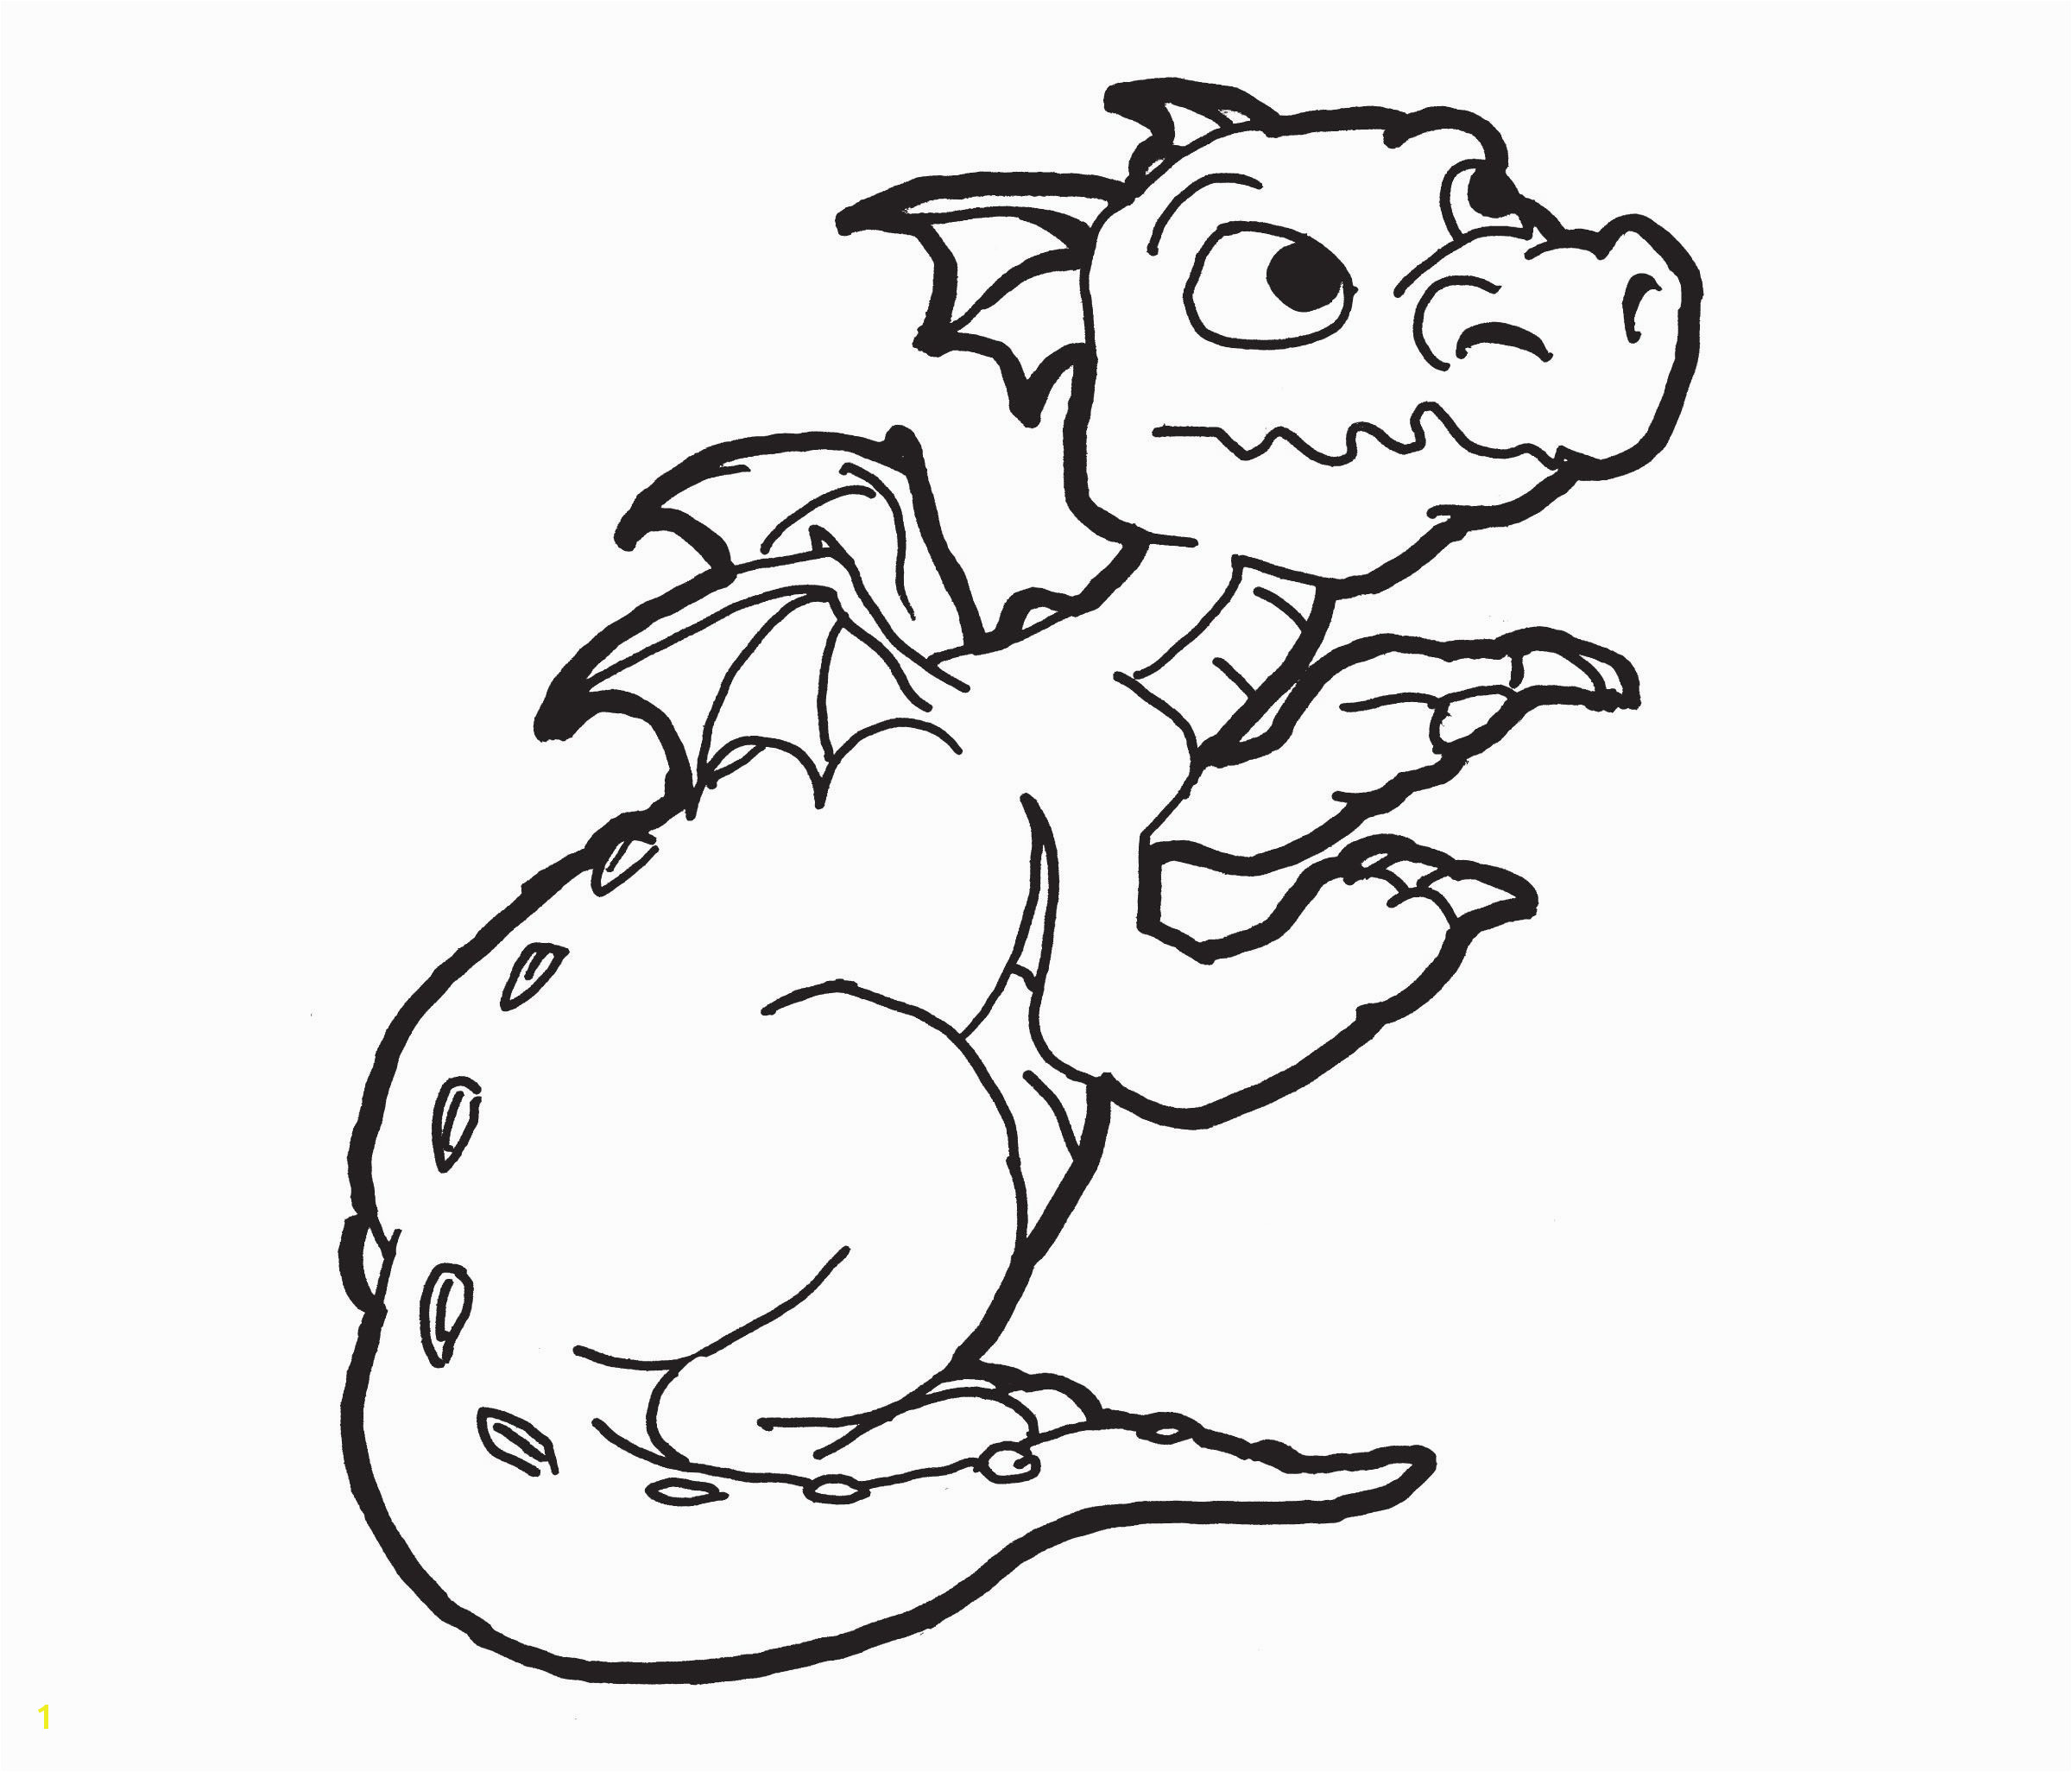 How to Train A Dragon Coloring Pages Free Free Printable Dragon Coloring Pages for Kids